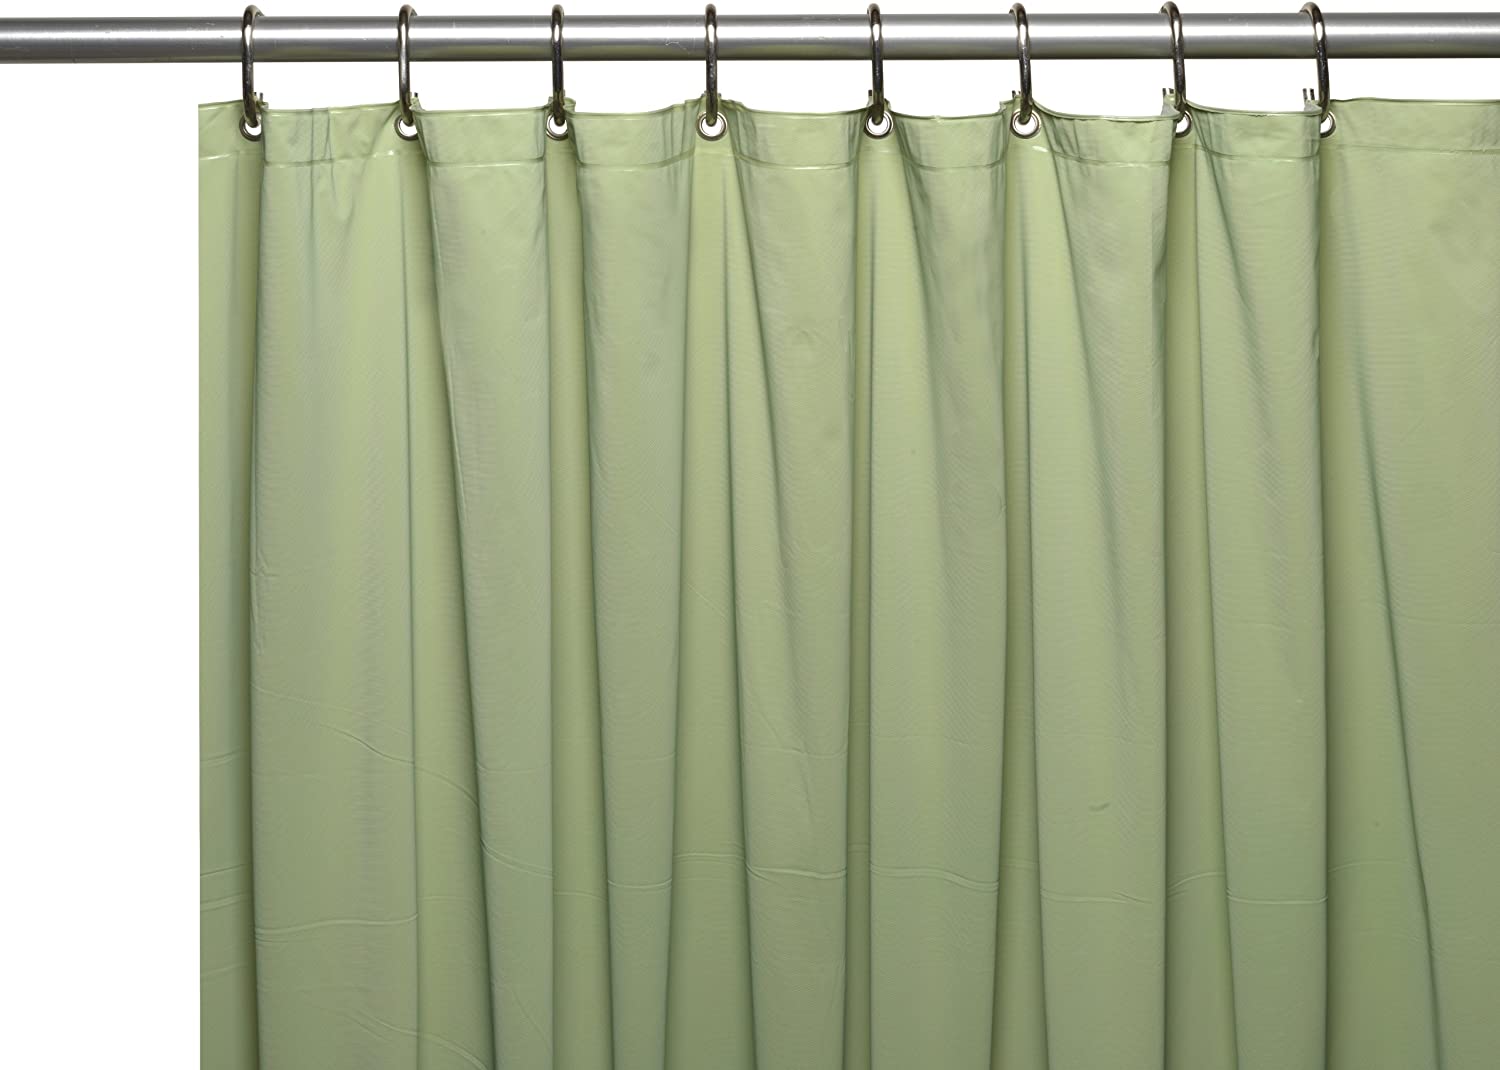 5 Gauge Vinyl Shower Curtain Liner, What Is Length Of Extra Long Shower Curtain